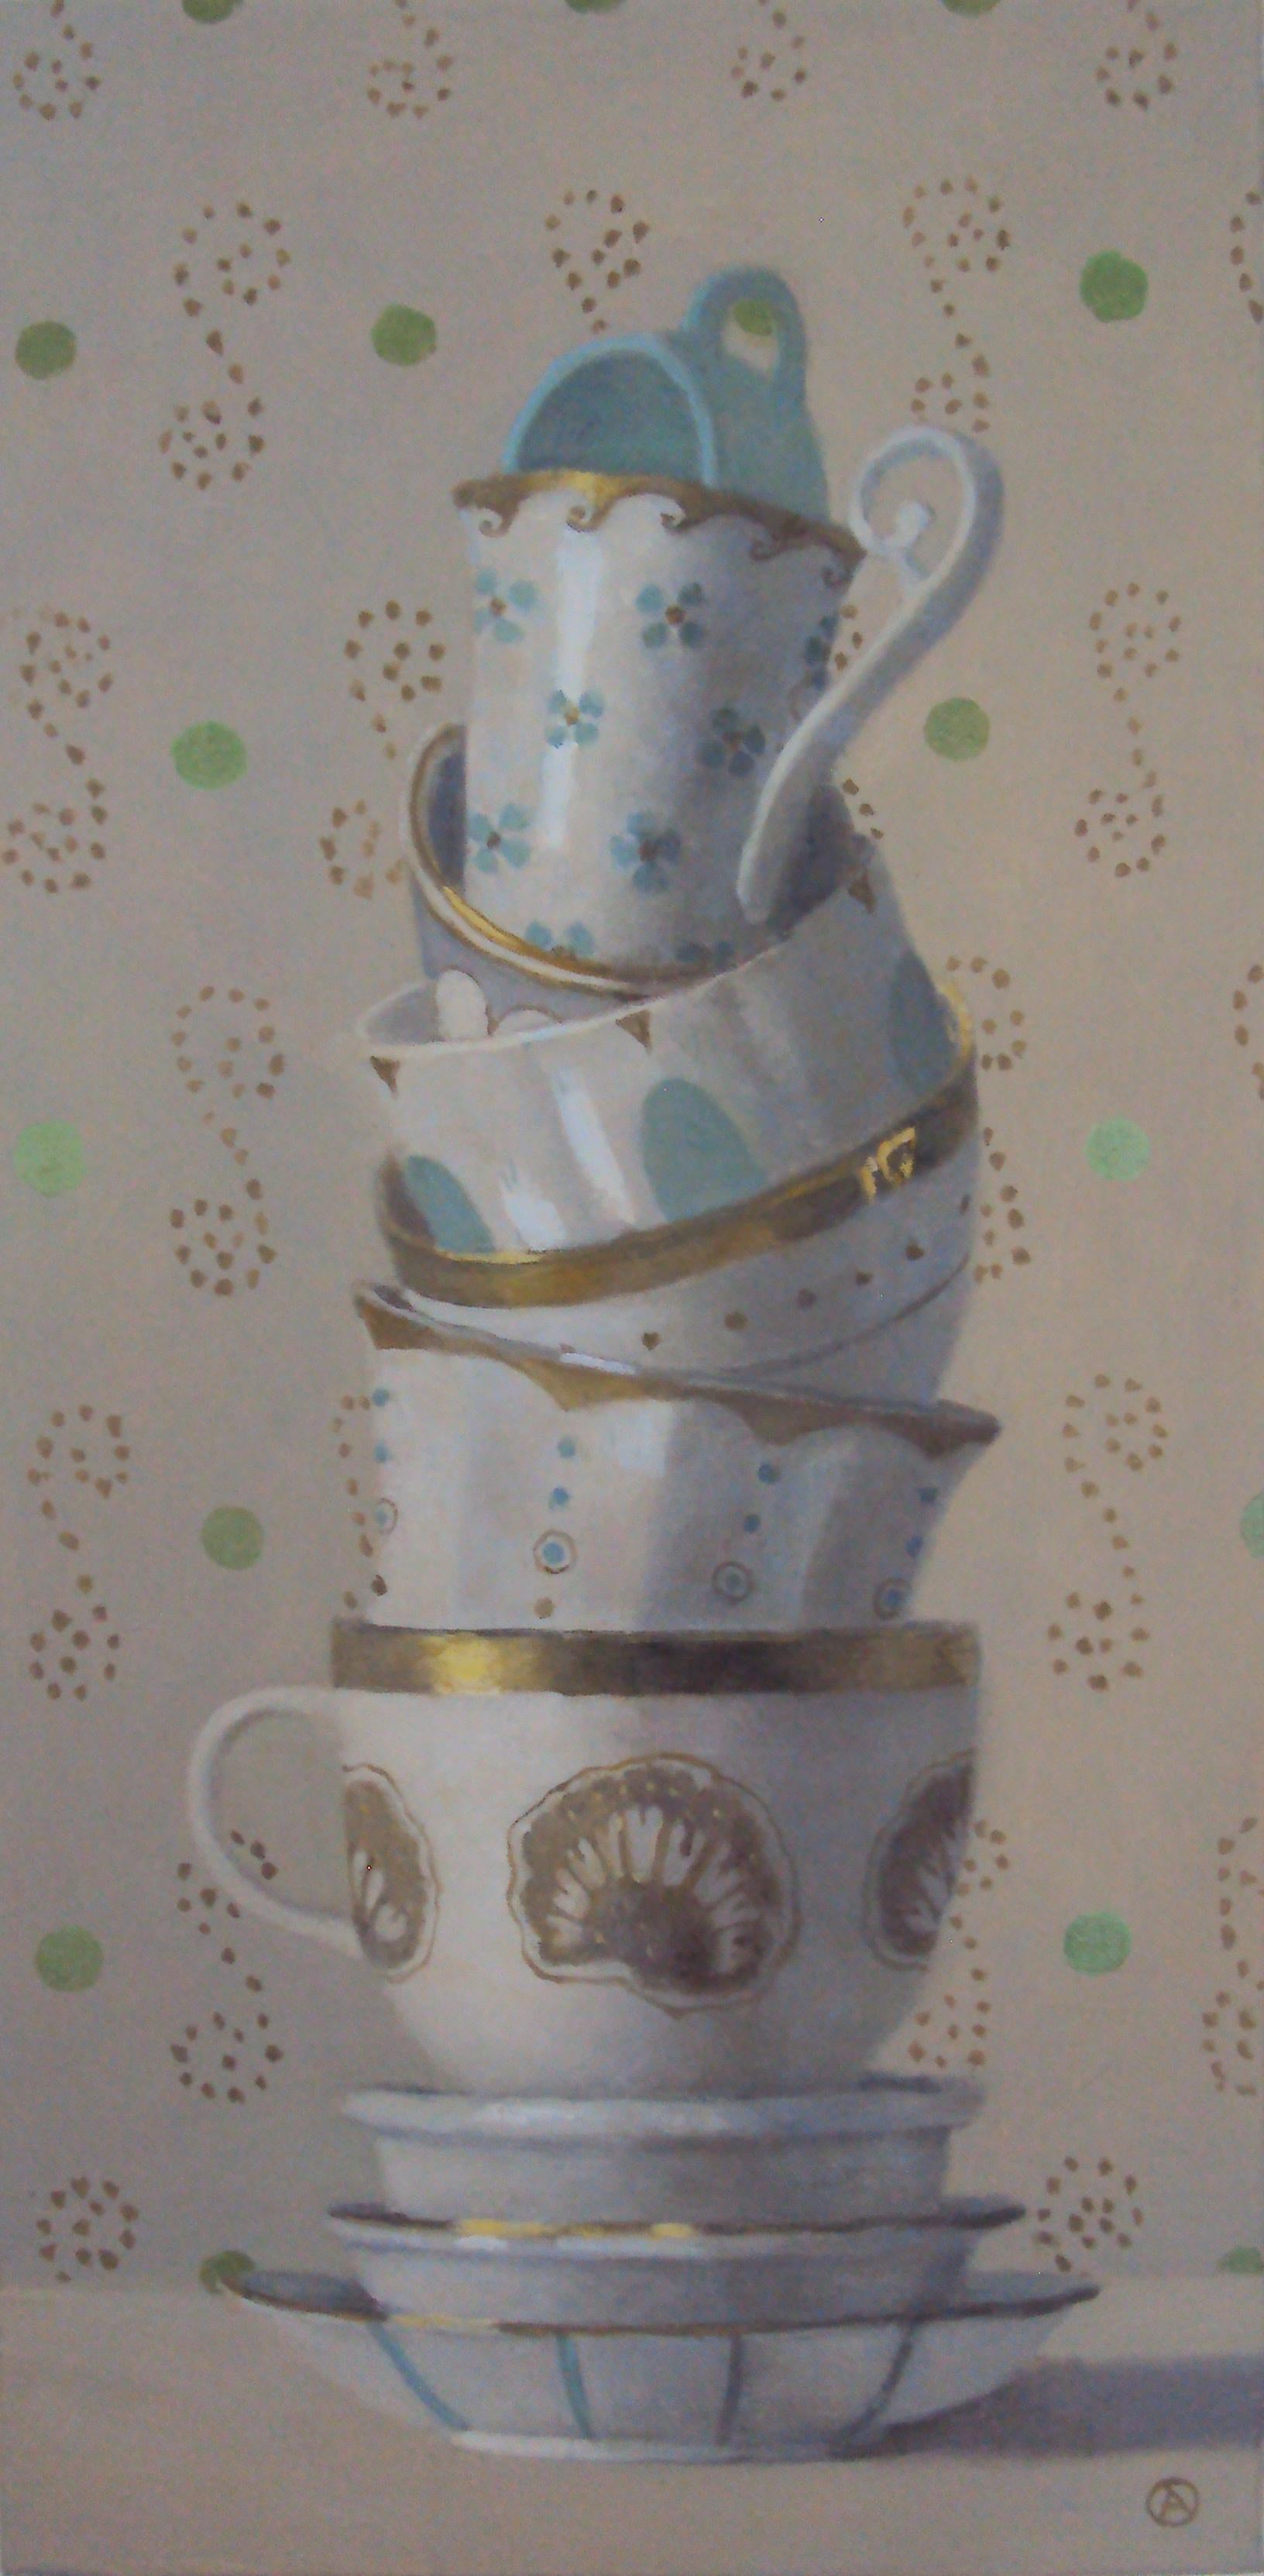 TOWER WITH GOLD SHELL CUP - Still life, teacups, realism